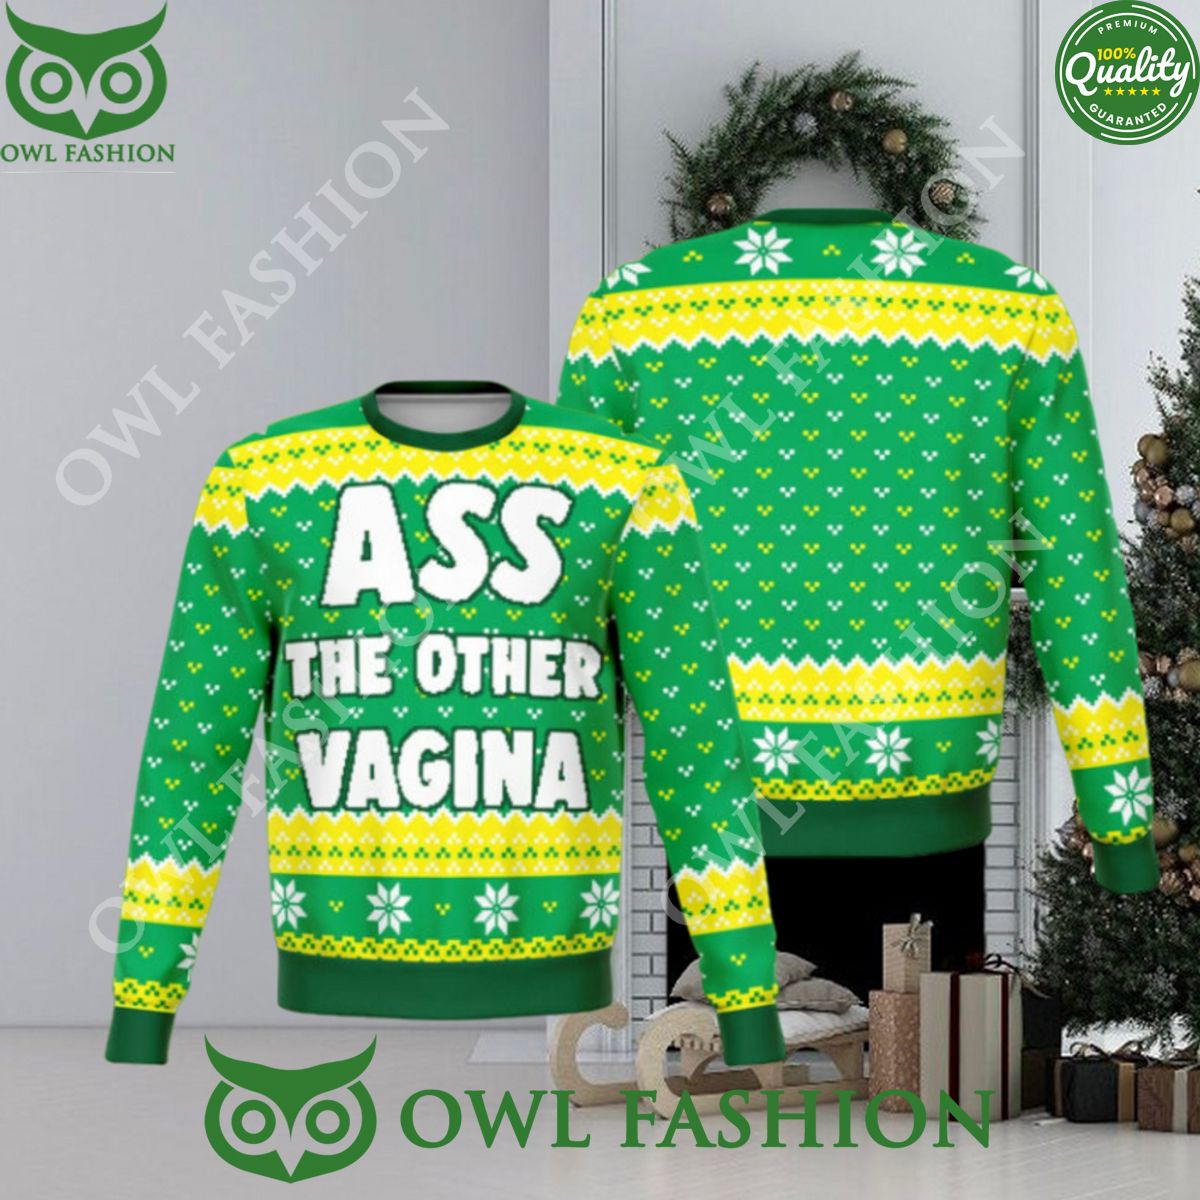 Ass the other vagina Christmas sweater Radiant and glowing Pic dear